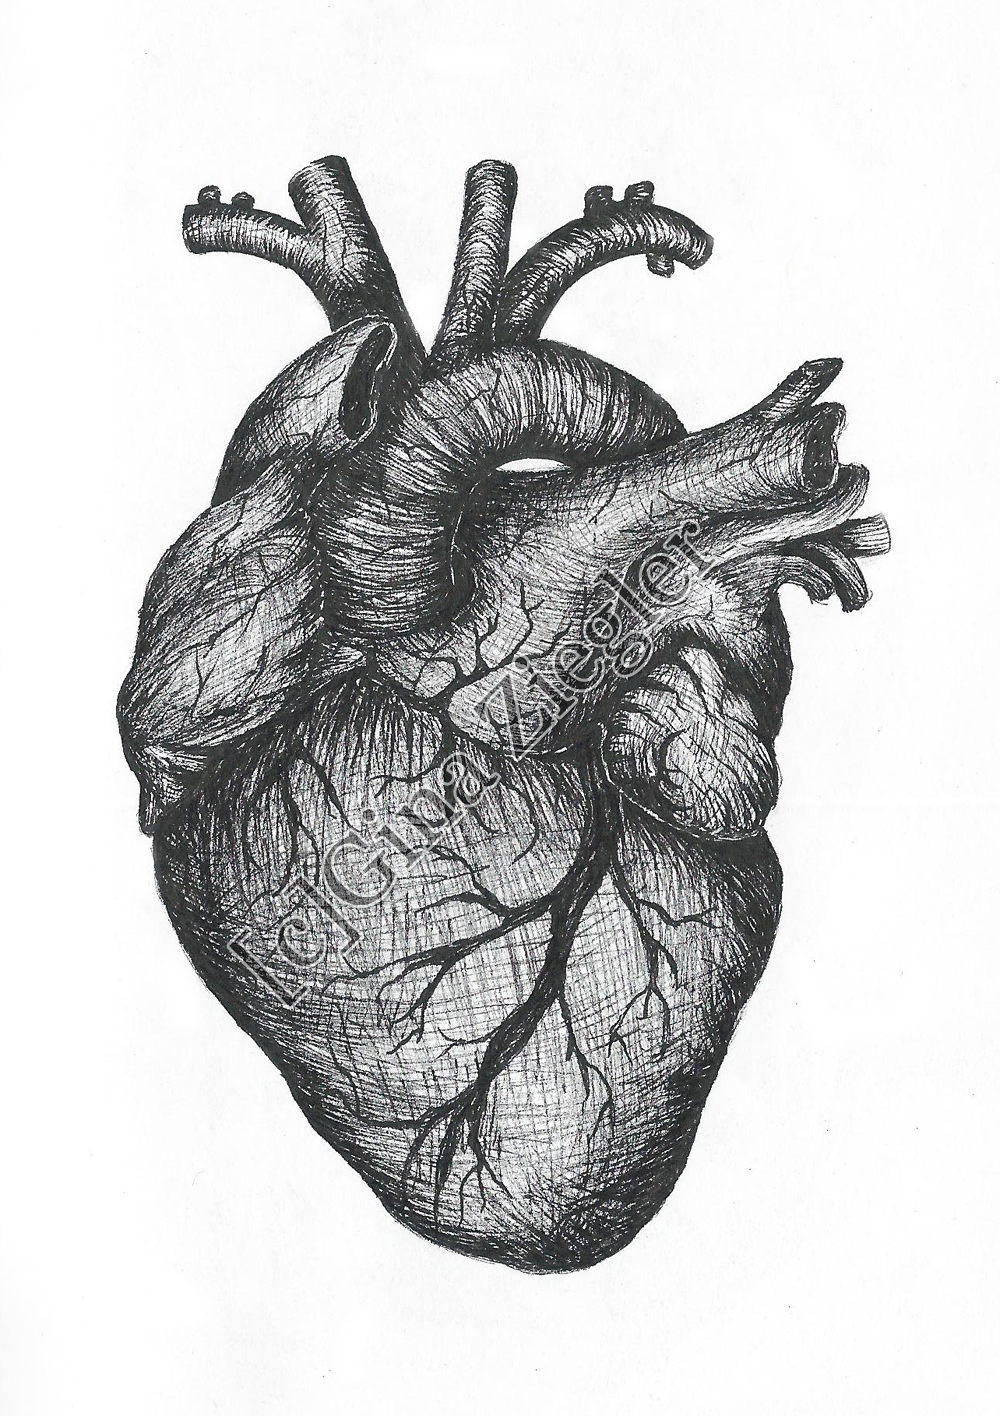 Real Heart Drawing - Cliparts.co